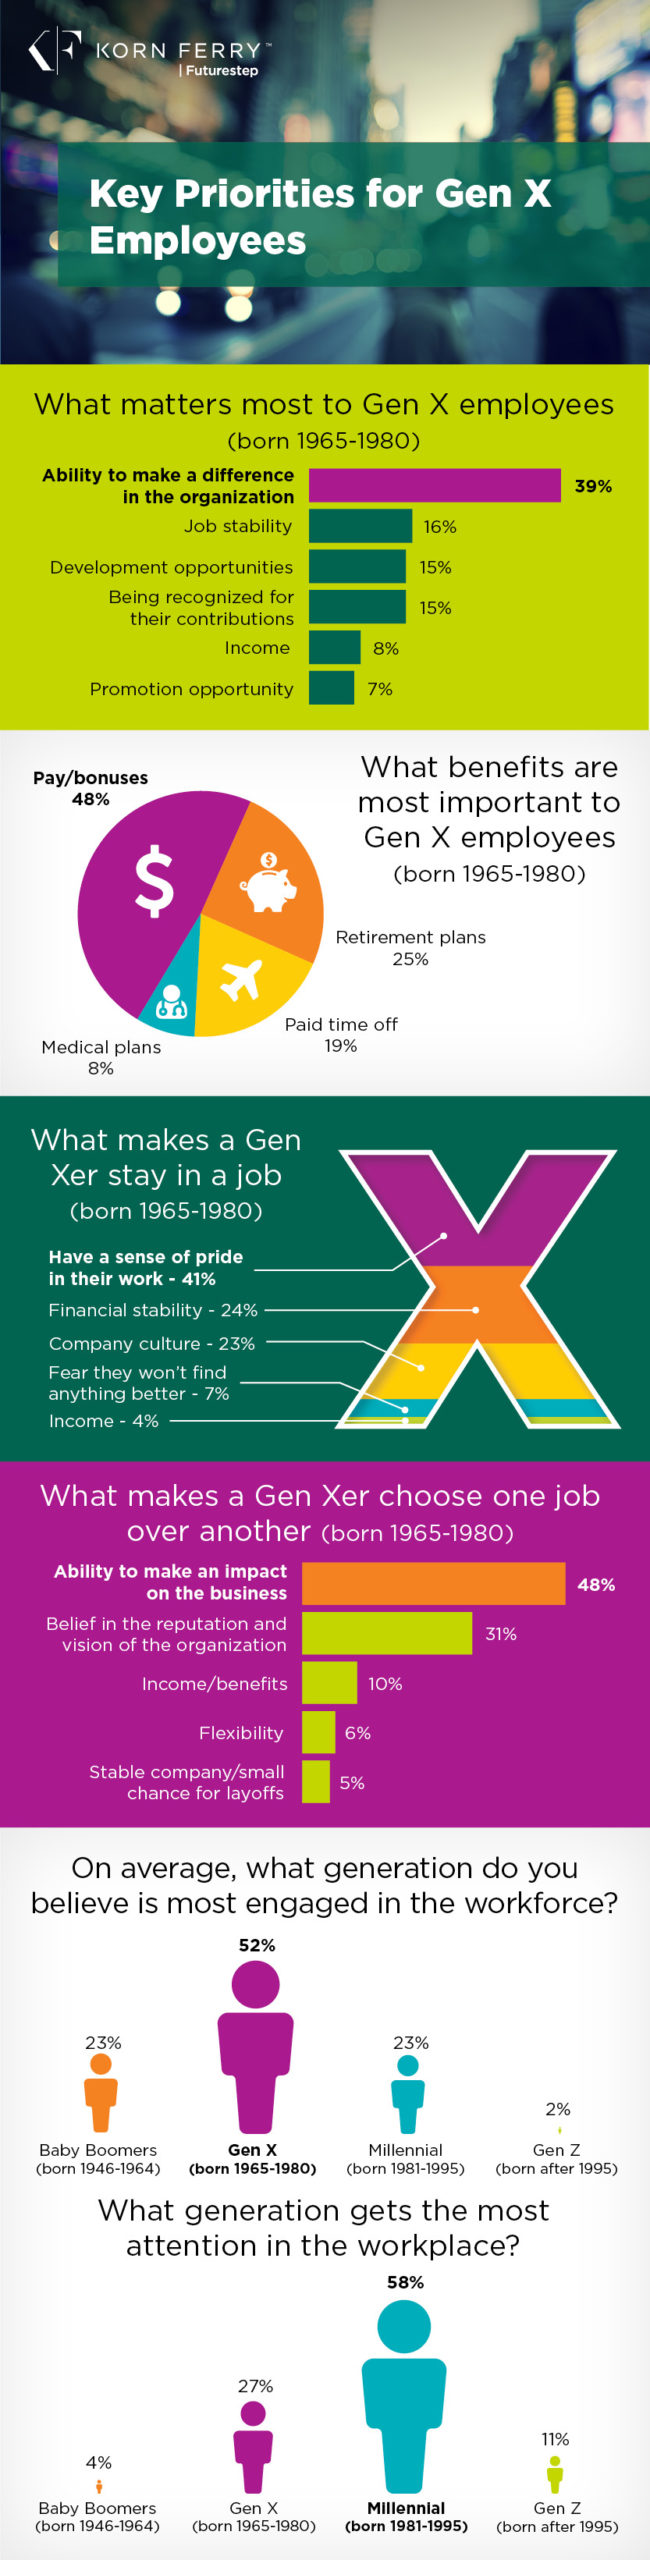 Infographic Shows Generation X Most Engaged in the Workforce